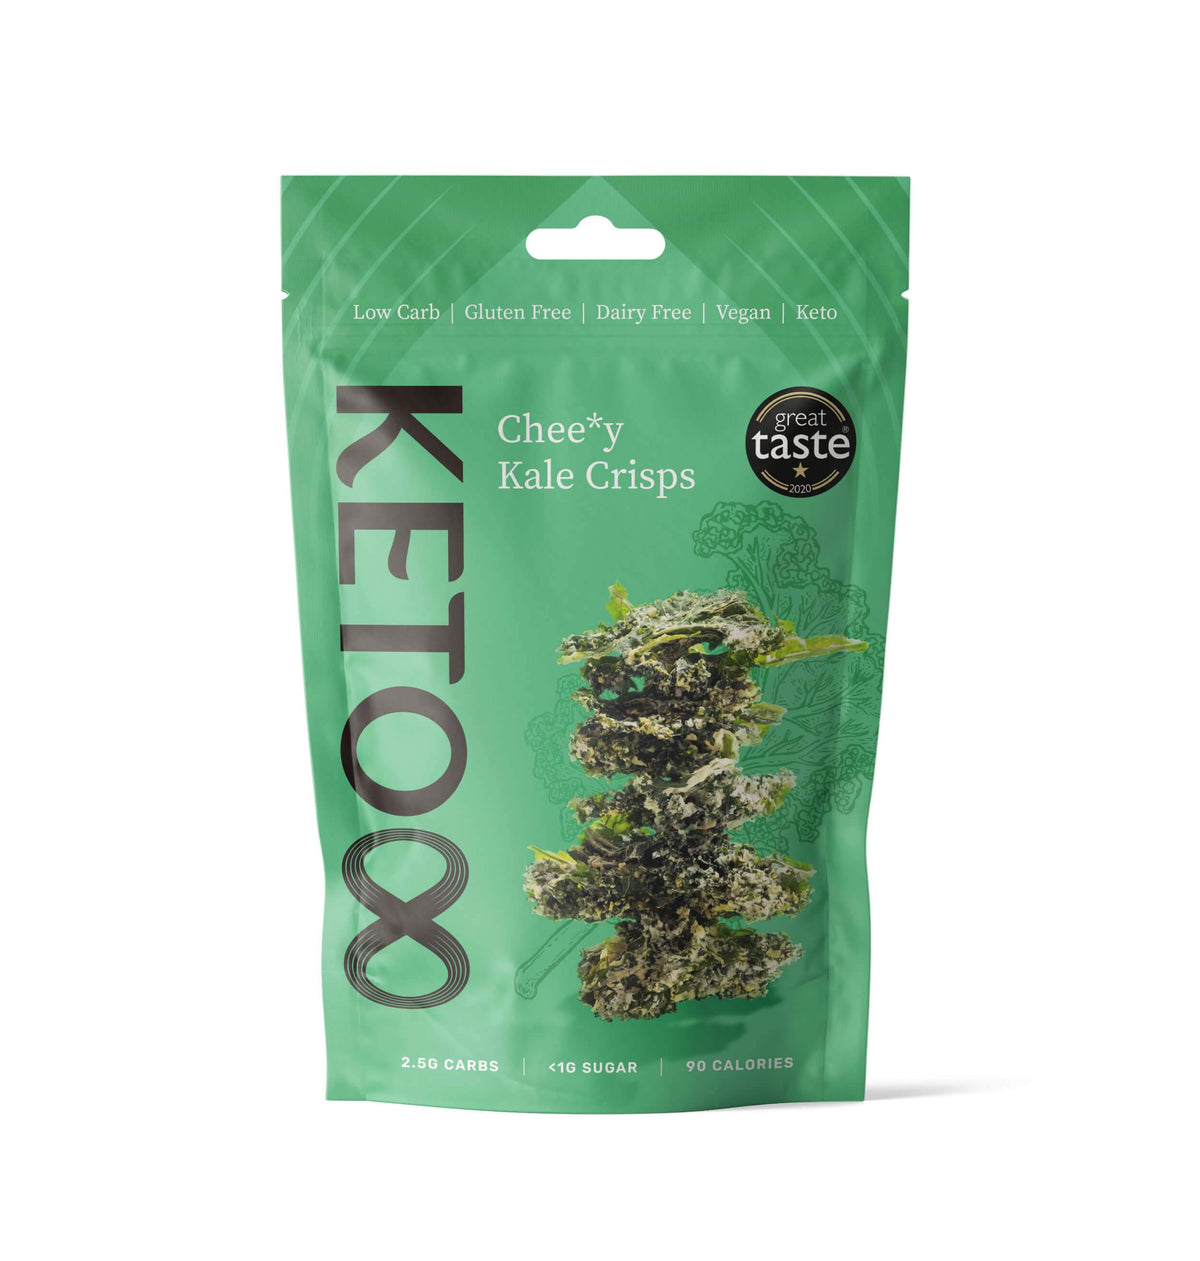 Raw Chee*y Kale Chips (30g) | 8 Foods | Raw Living UK | Eight Foods Raw Chee*y Kale Chips: Deliciously Crunchy, Cheesy-Tasting, but totally Dairy-Free Kale crisps. A Healthy Gluten, Wheat &amp; Refined Sugar-free Snack.